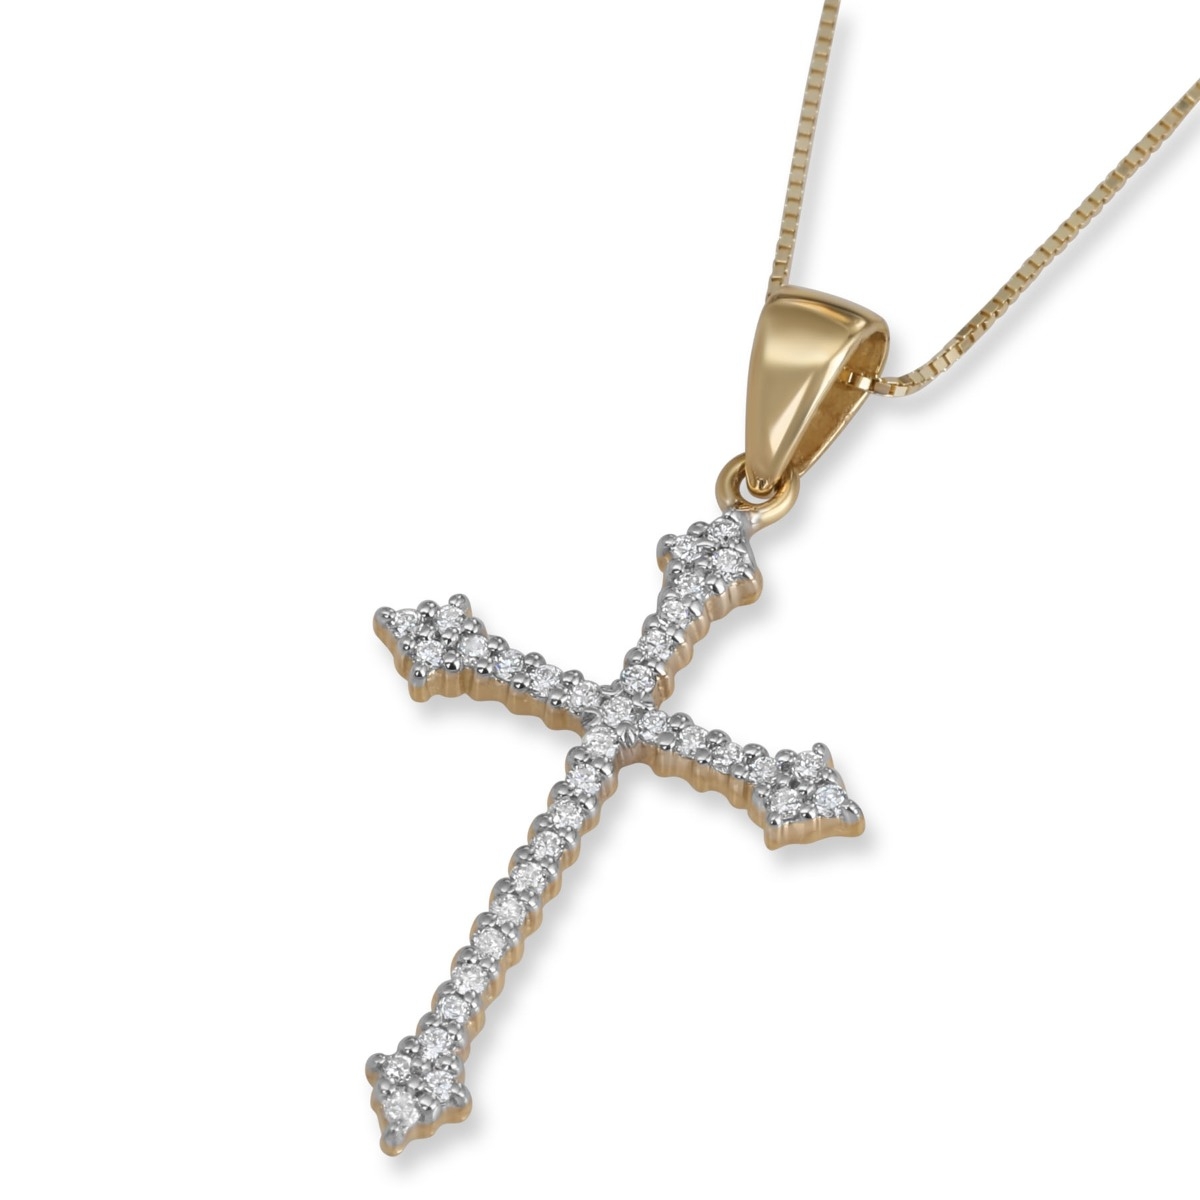 Deluxe 14K Yellow Gold and Diamond Slender Budded Cross Pendant with 35 Diamonds - 1